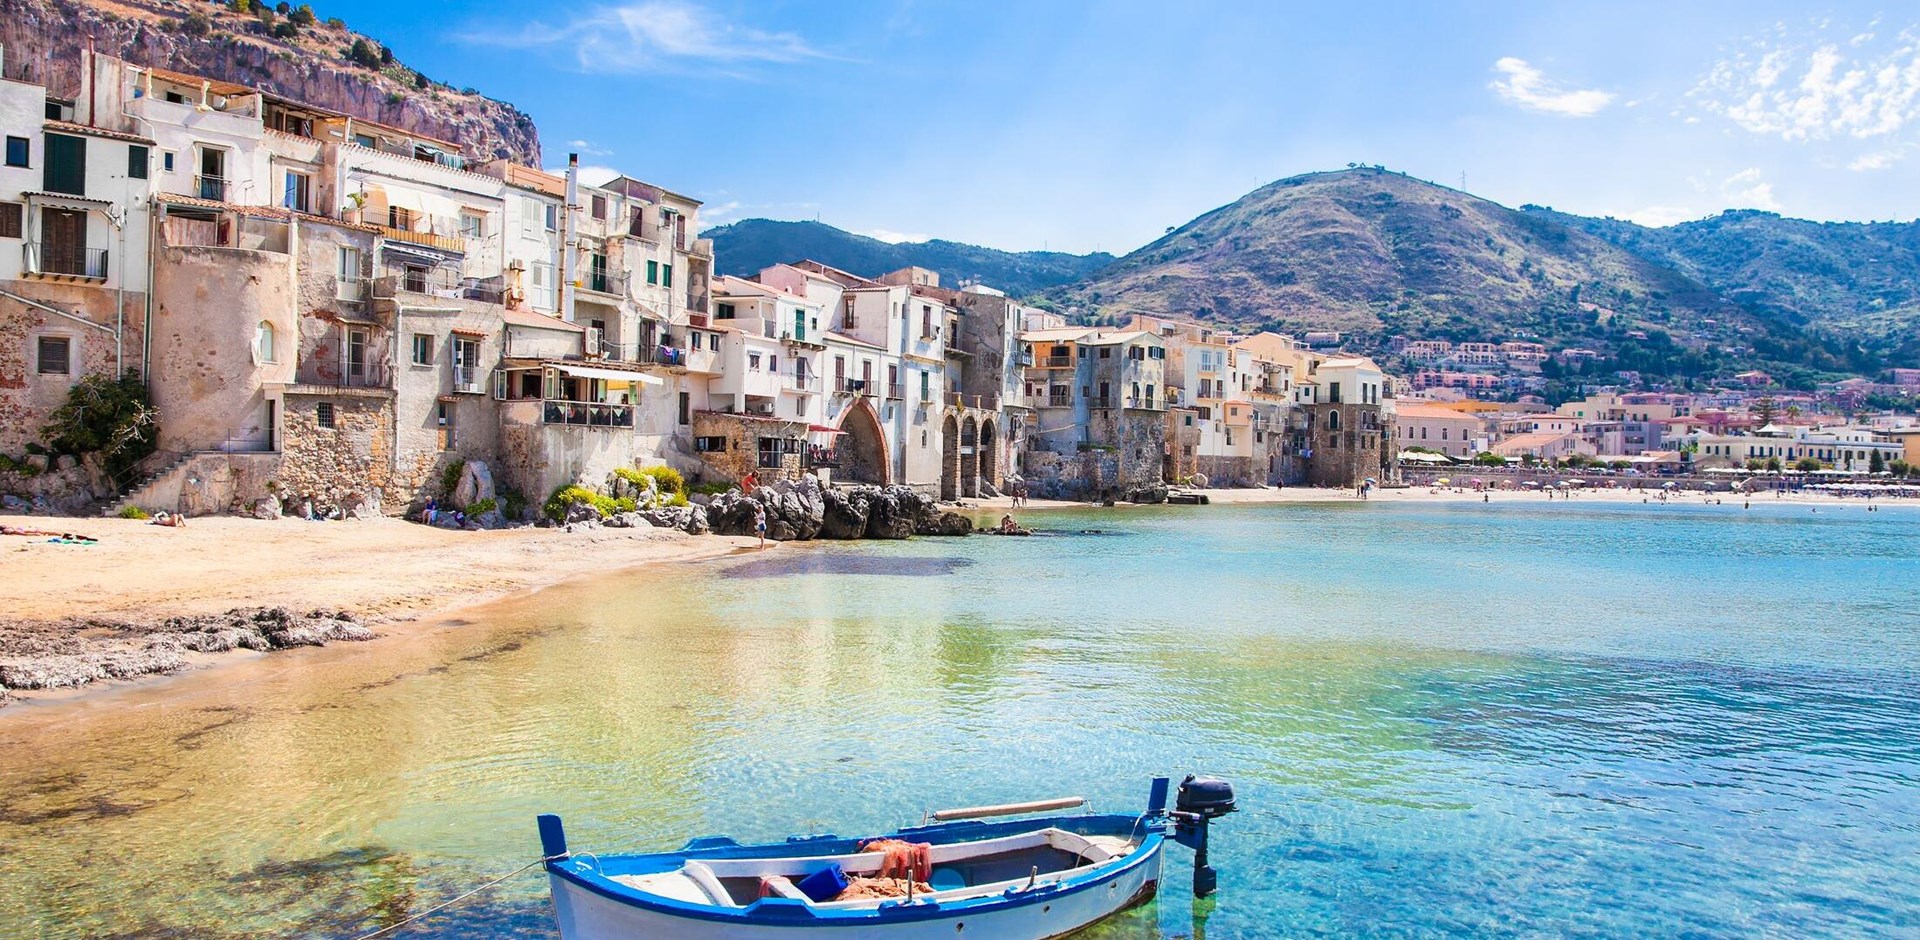 Beautiful old harbor with wooden fishing boat in Cefalu, Sicily, Italy.